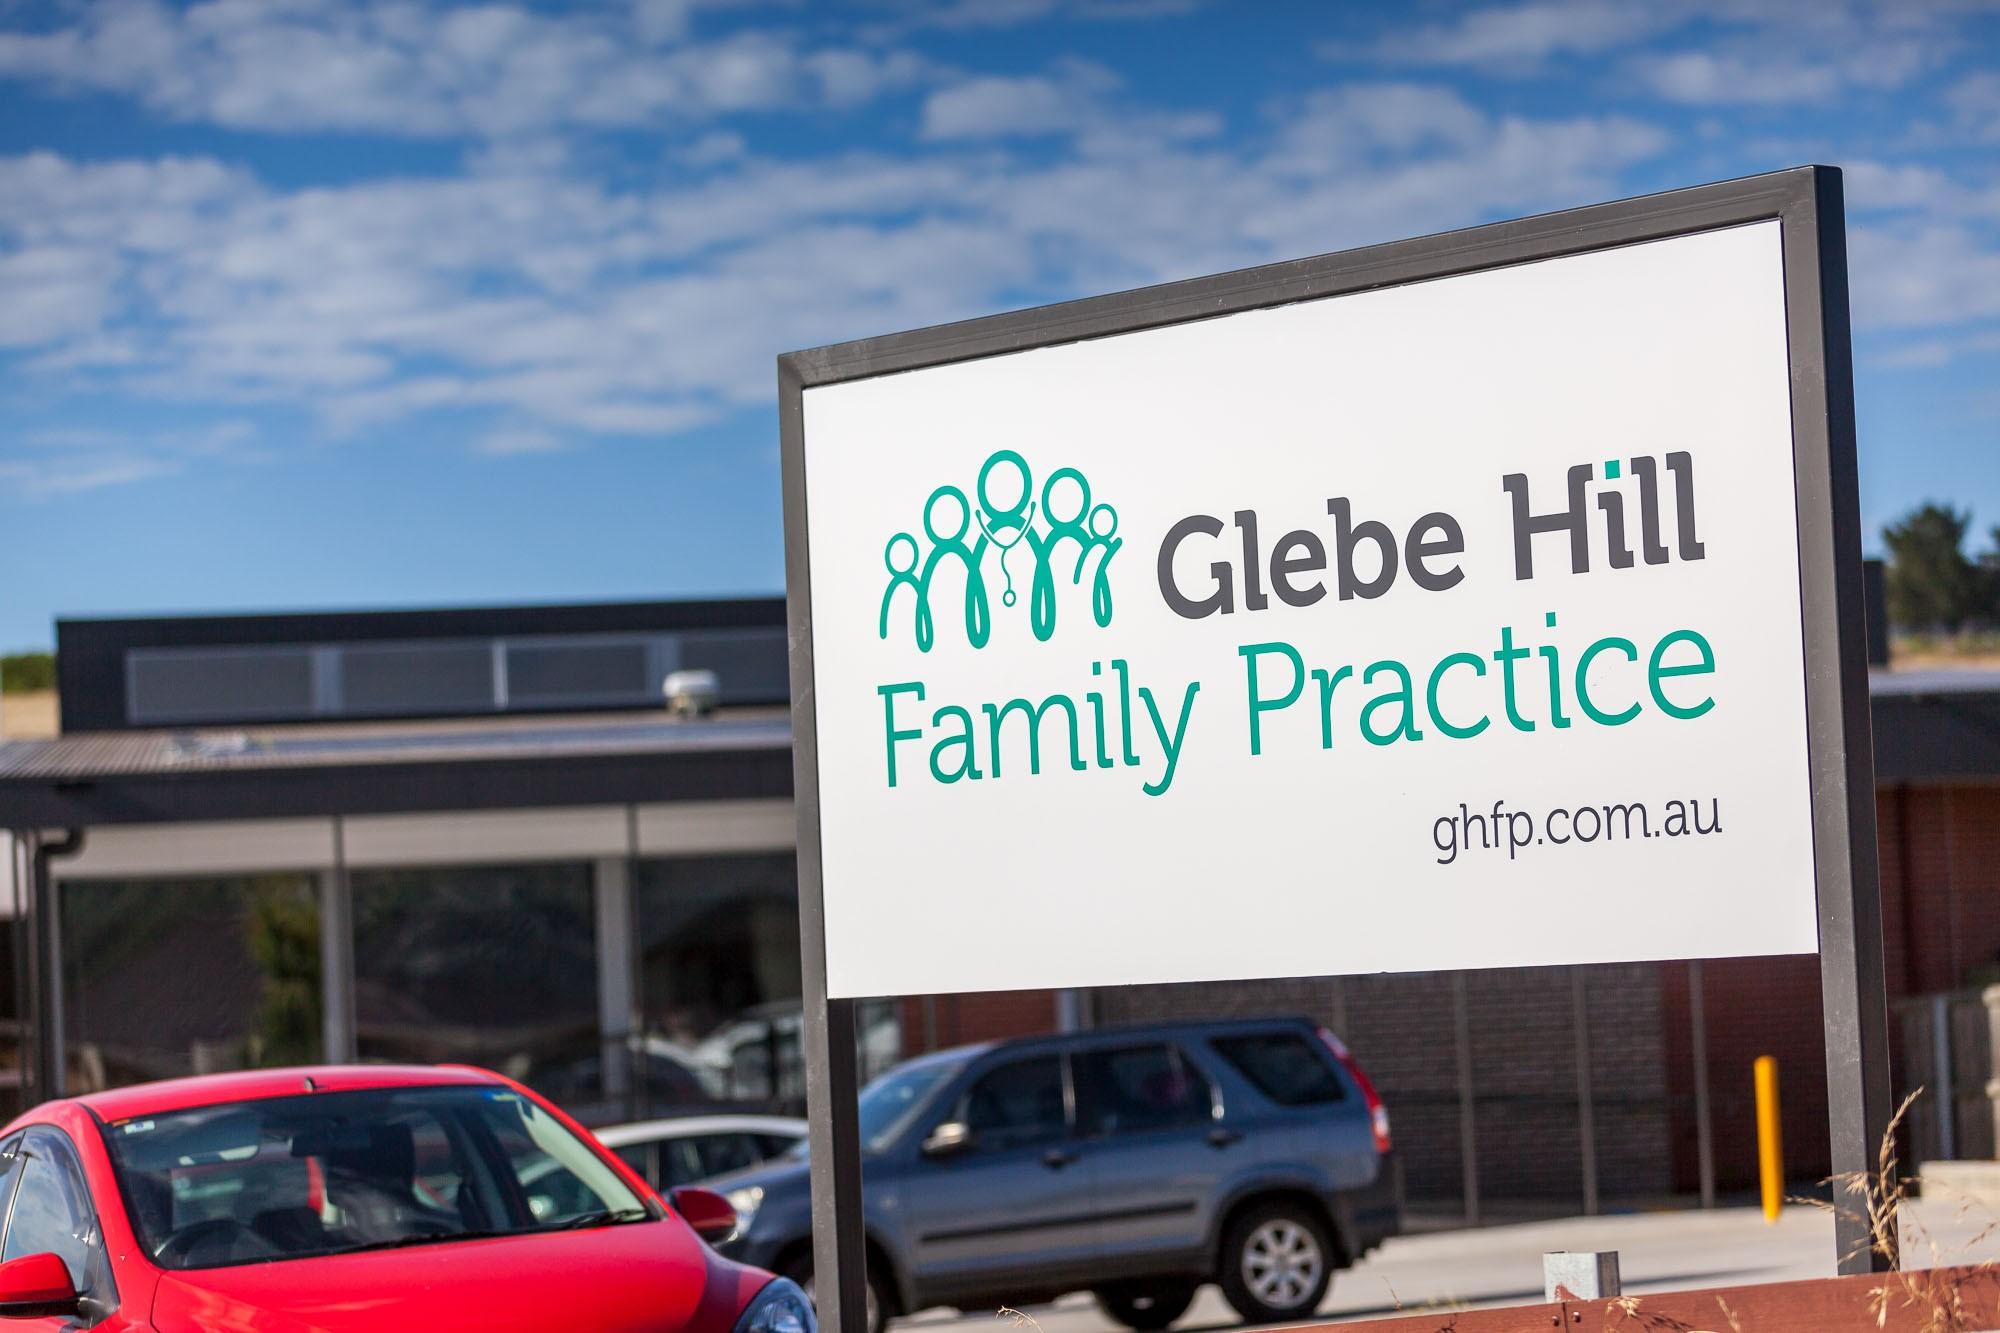 Glebe Hill Family Practice - Signage at entrance